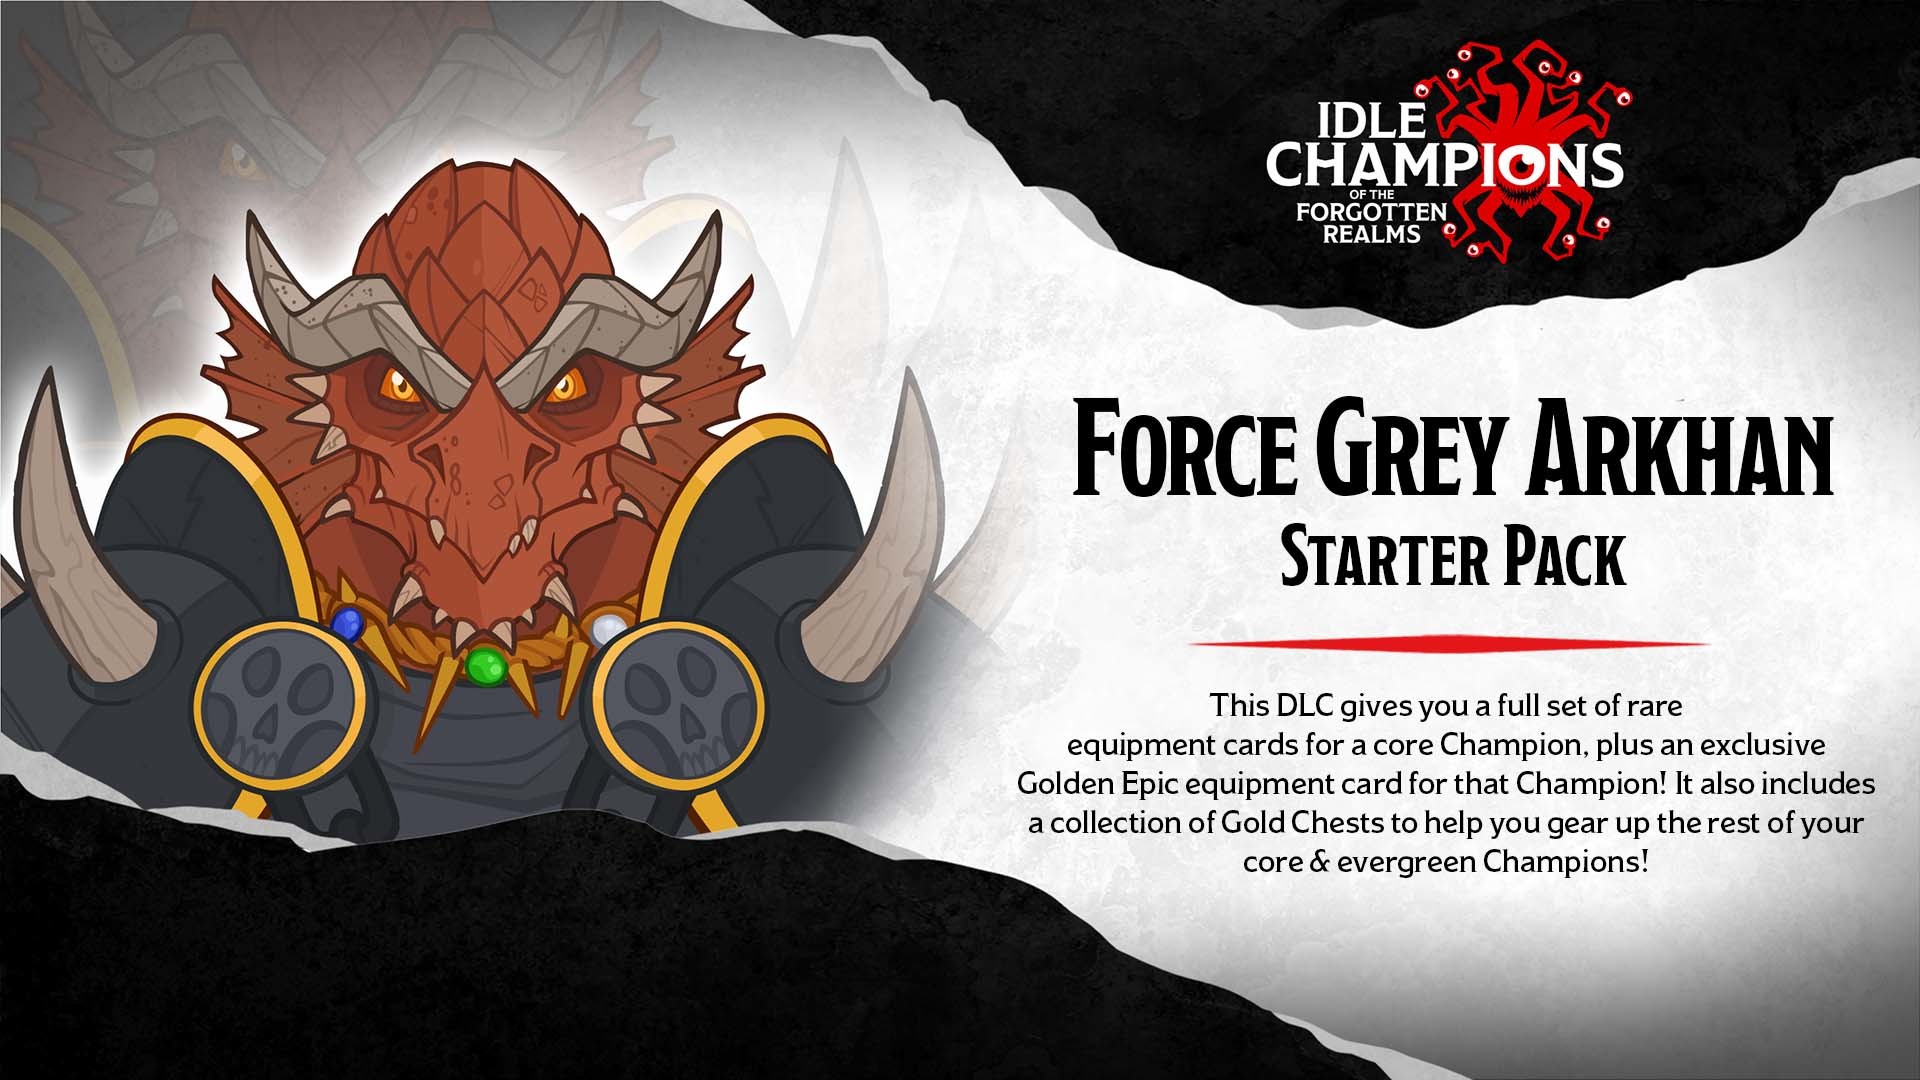 Idle Champions - Force Grey Arkhan Starter Pack Featured Screenshot #1